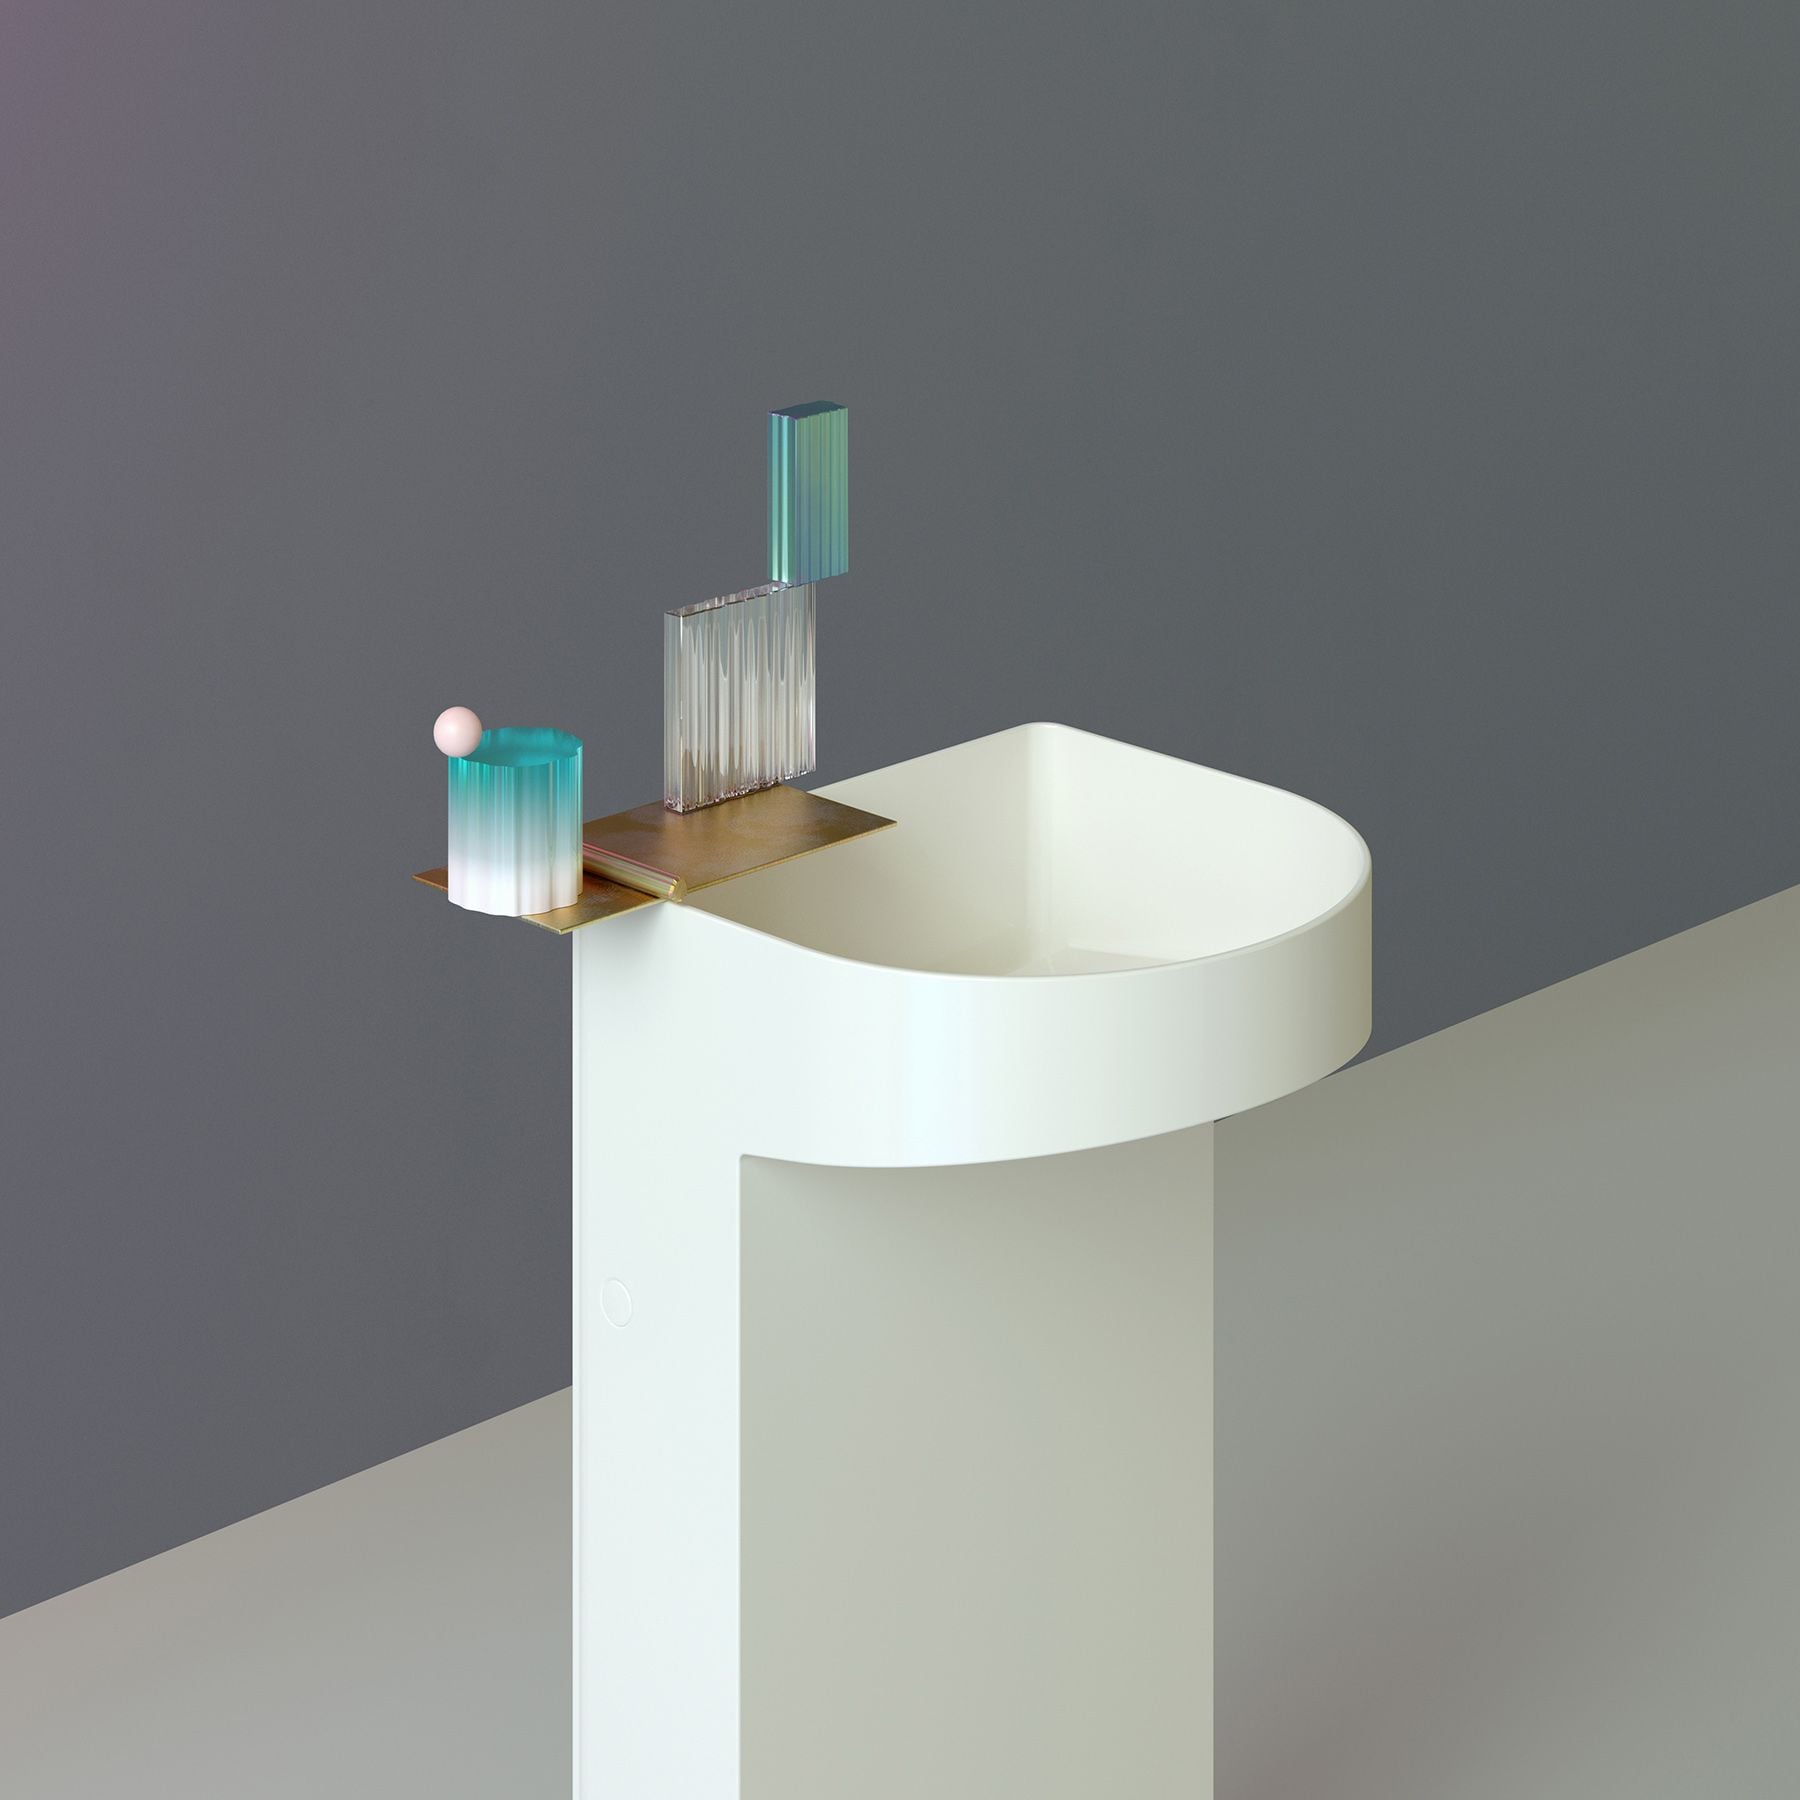 A rounded, white SONAR wash basin, complete with a couple futuristic fixtures for an even cooler effect.